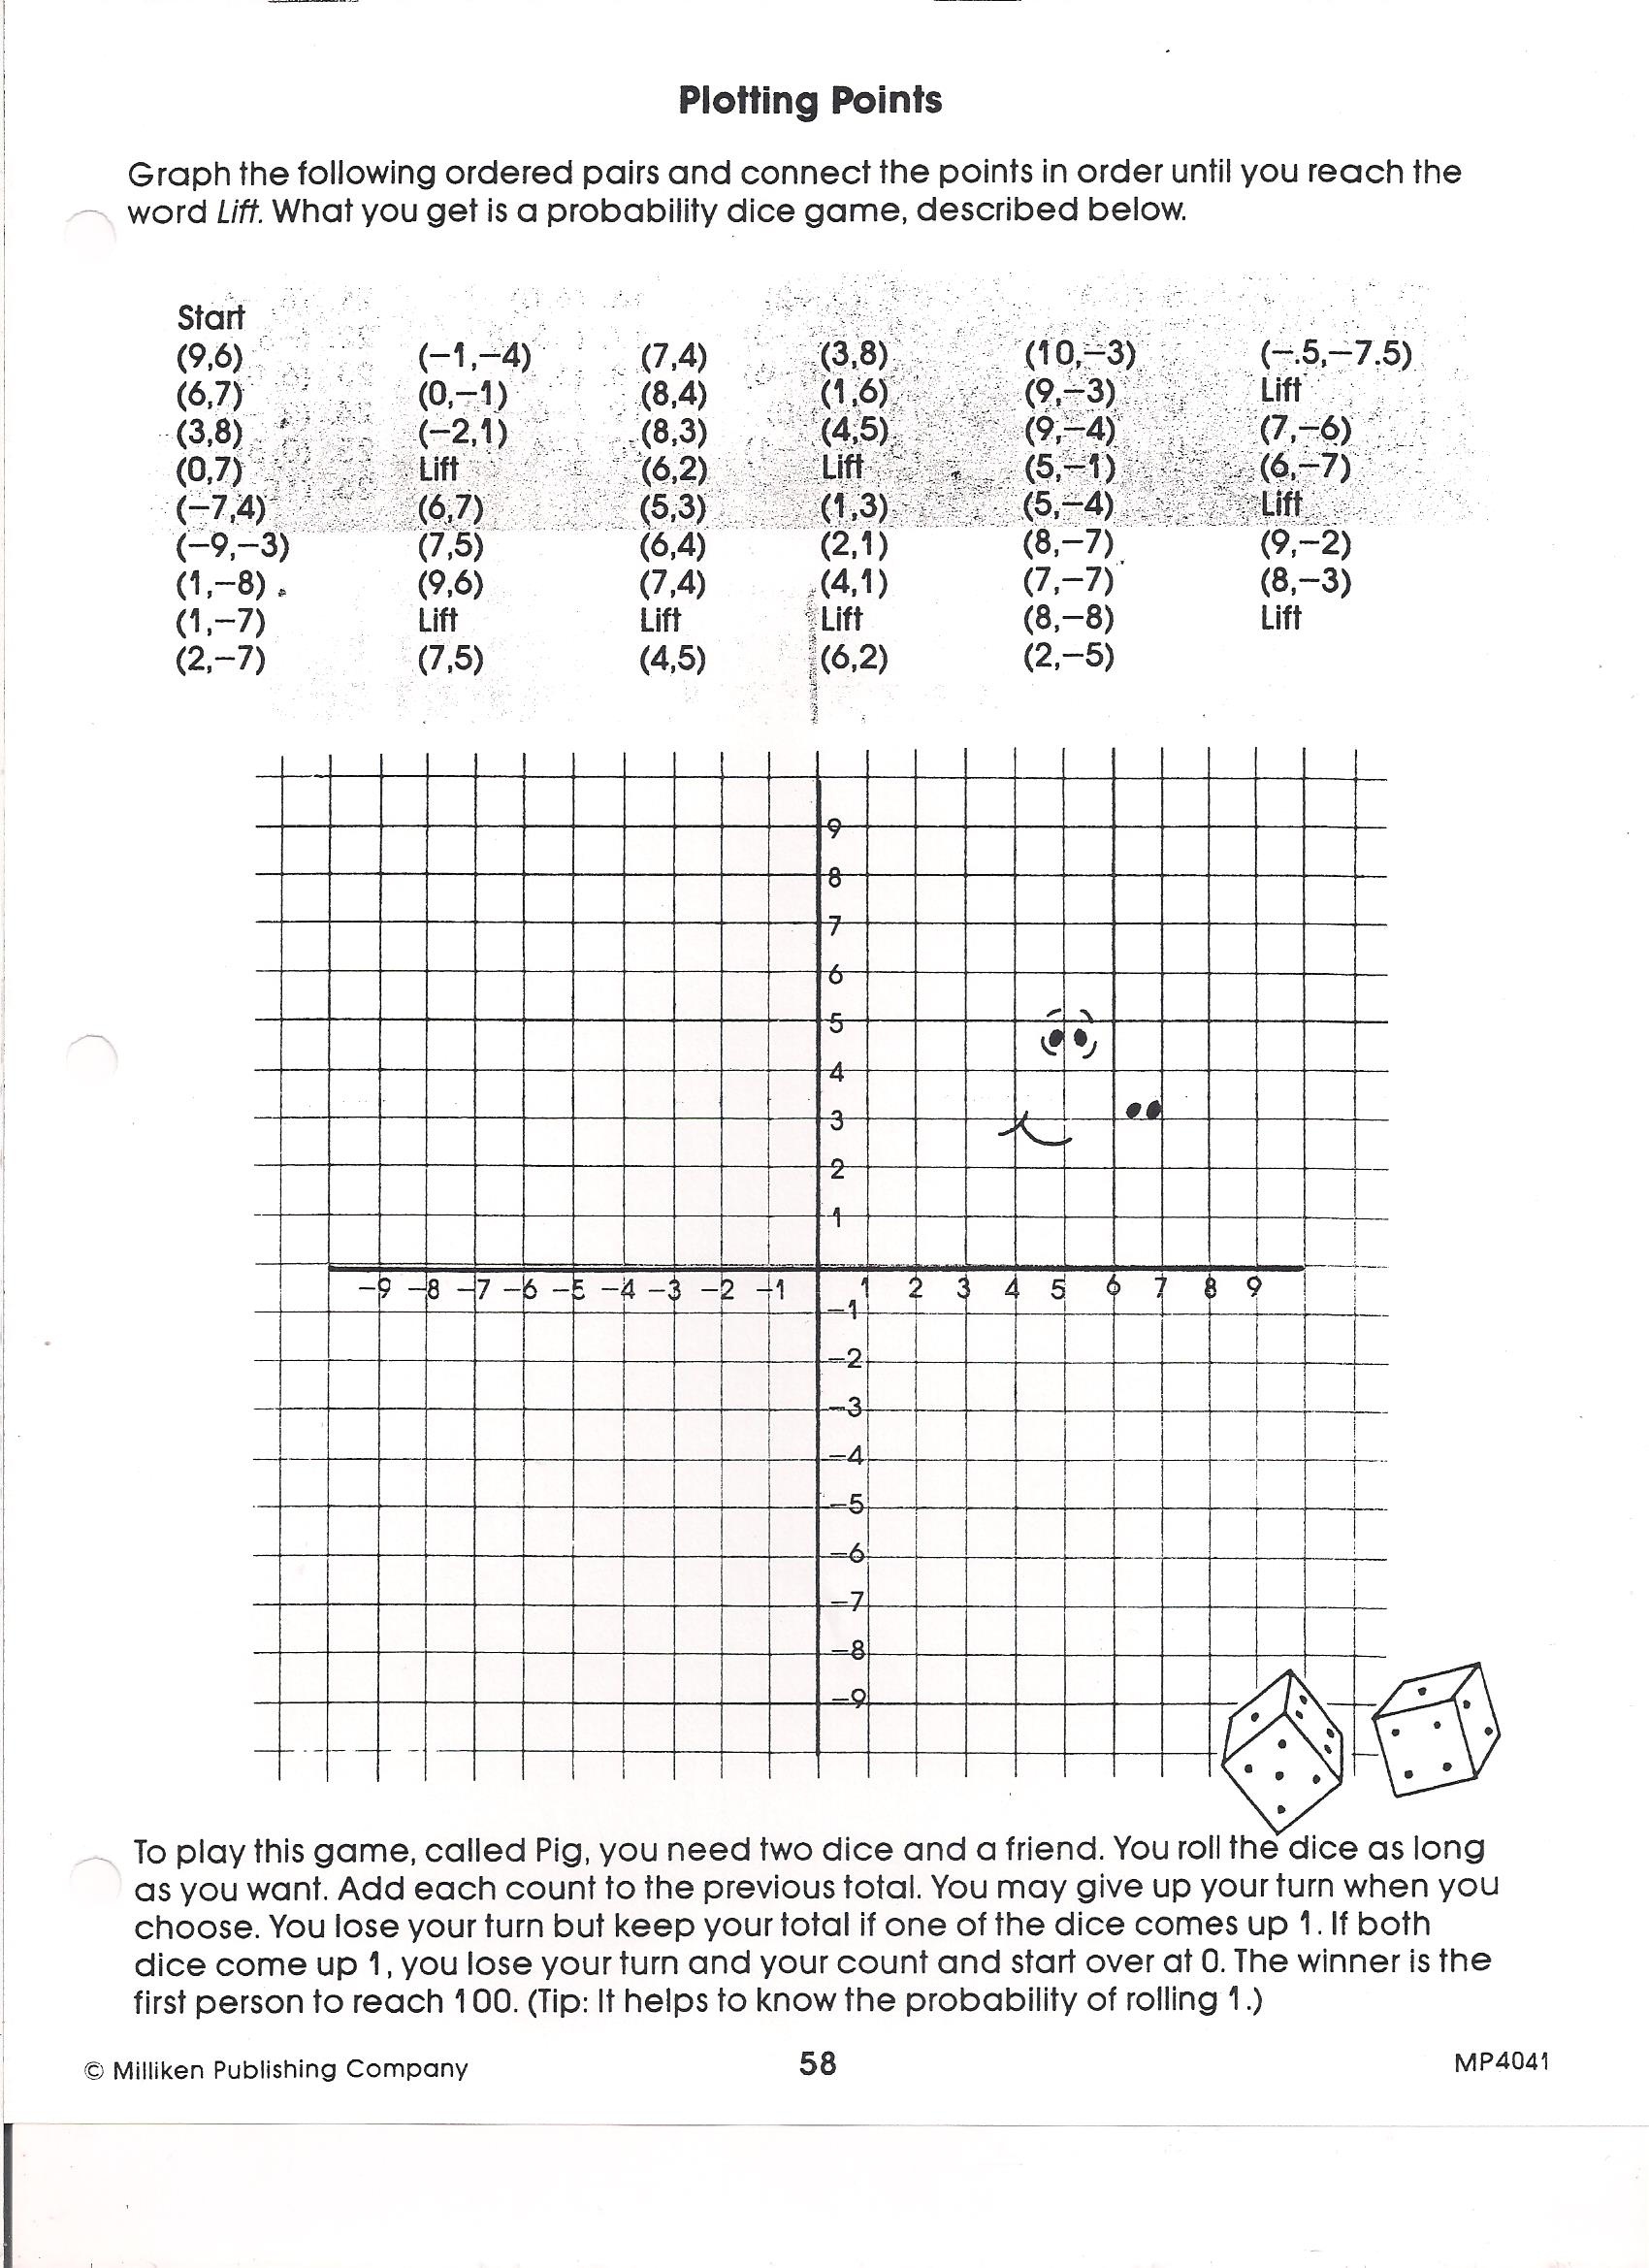 Mystery Free Printable Coordinate Graphing Pictures Worksheets